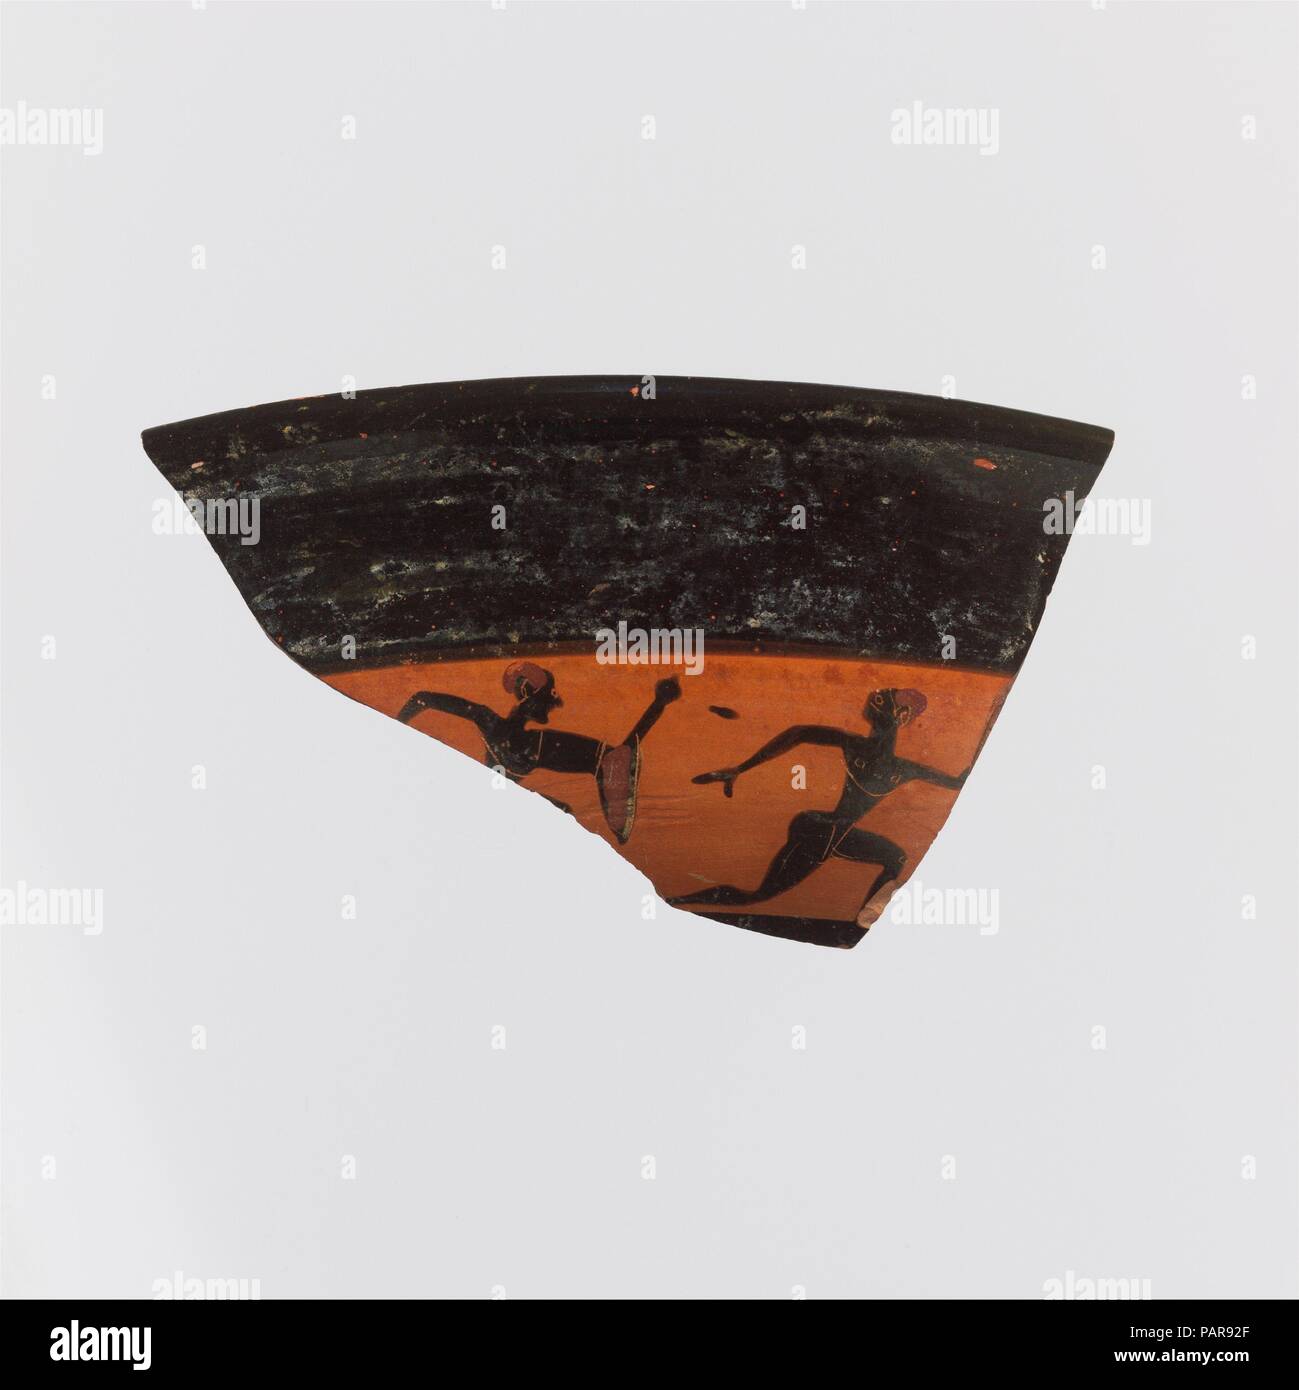 Fragment of a kylix: band-cup (drinking cup). Culture: Greek, Attic. Dimensions: Overall: 1 3/4 x 3 15/16in. (4.5 x 10cm). Date: ca. 540 B.C..  Parts of two youths running full speed; one has chlamys draped over arm. Museum: Metropolitan Museum of Art, New York, USA. Stock Photo